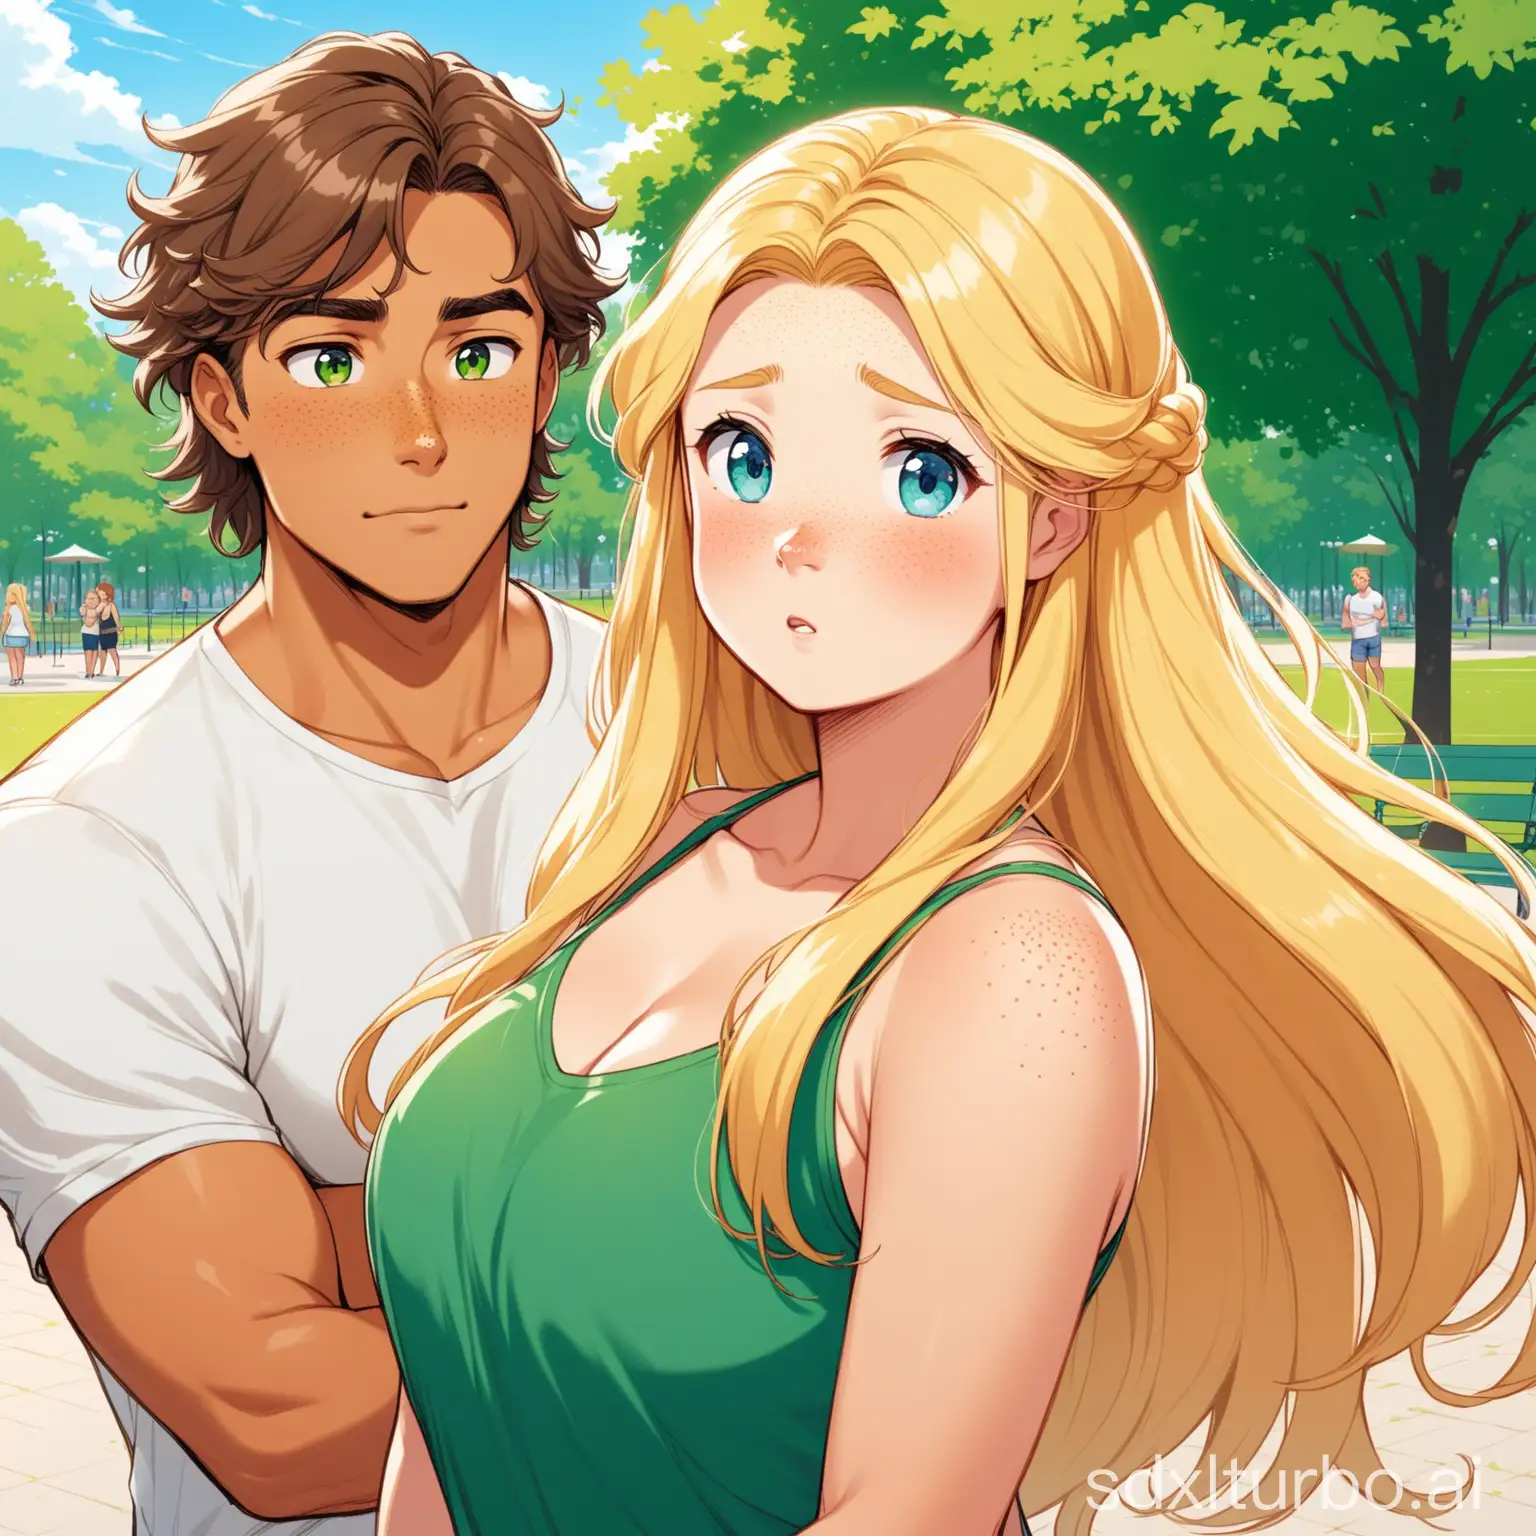 a handsome tanned chubby and young man, with brown mullet hair and green eyes, annoying a scandinavian blonde girl, with blue eyes, frizzy long hair and bangs, freckles, blushing expression, in a park, full view